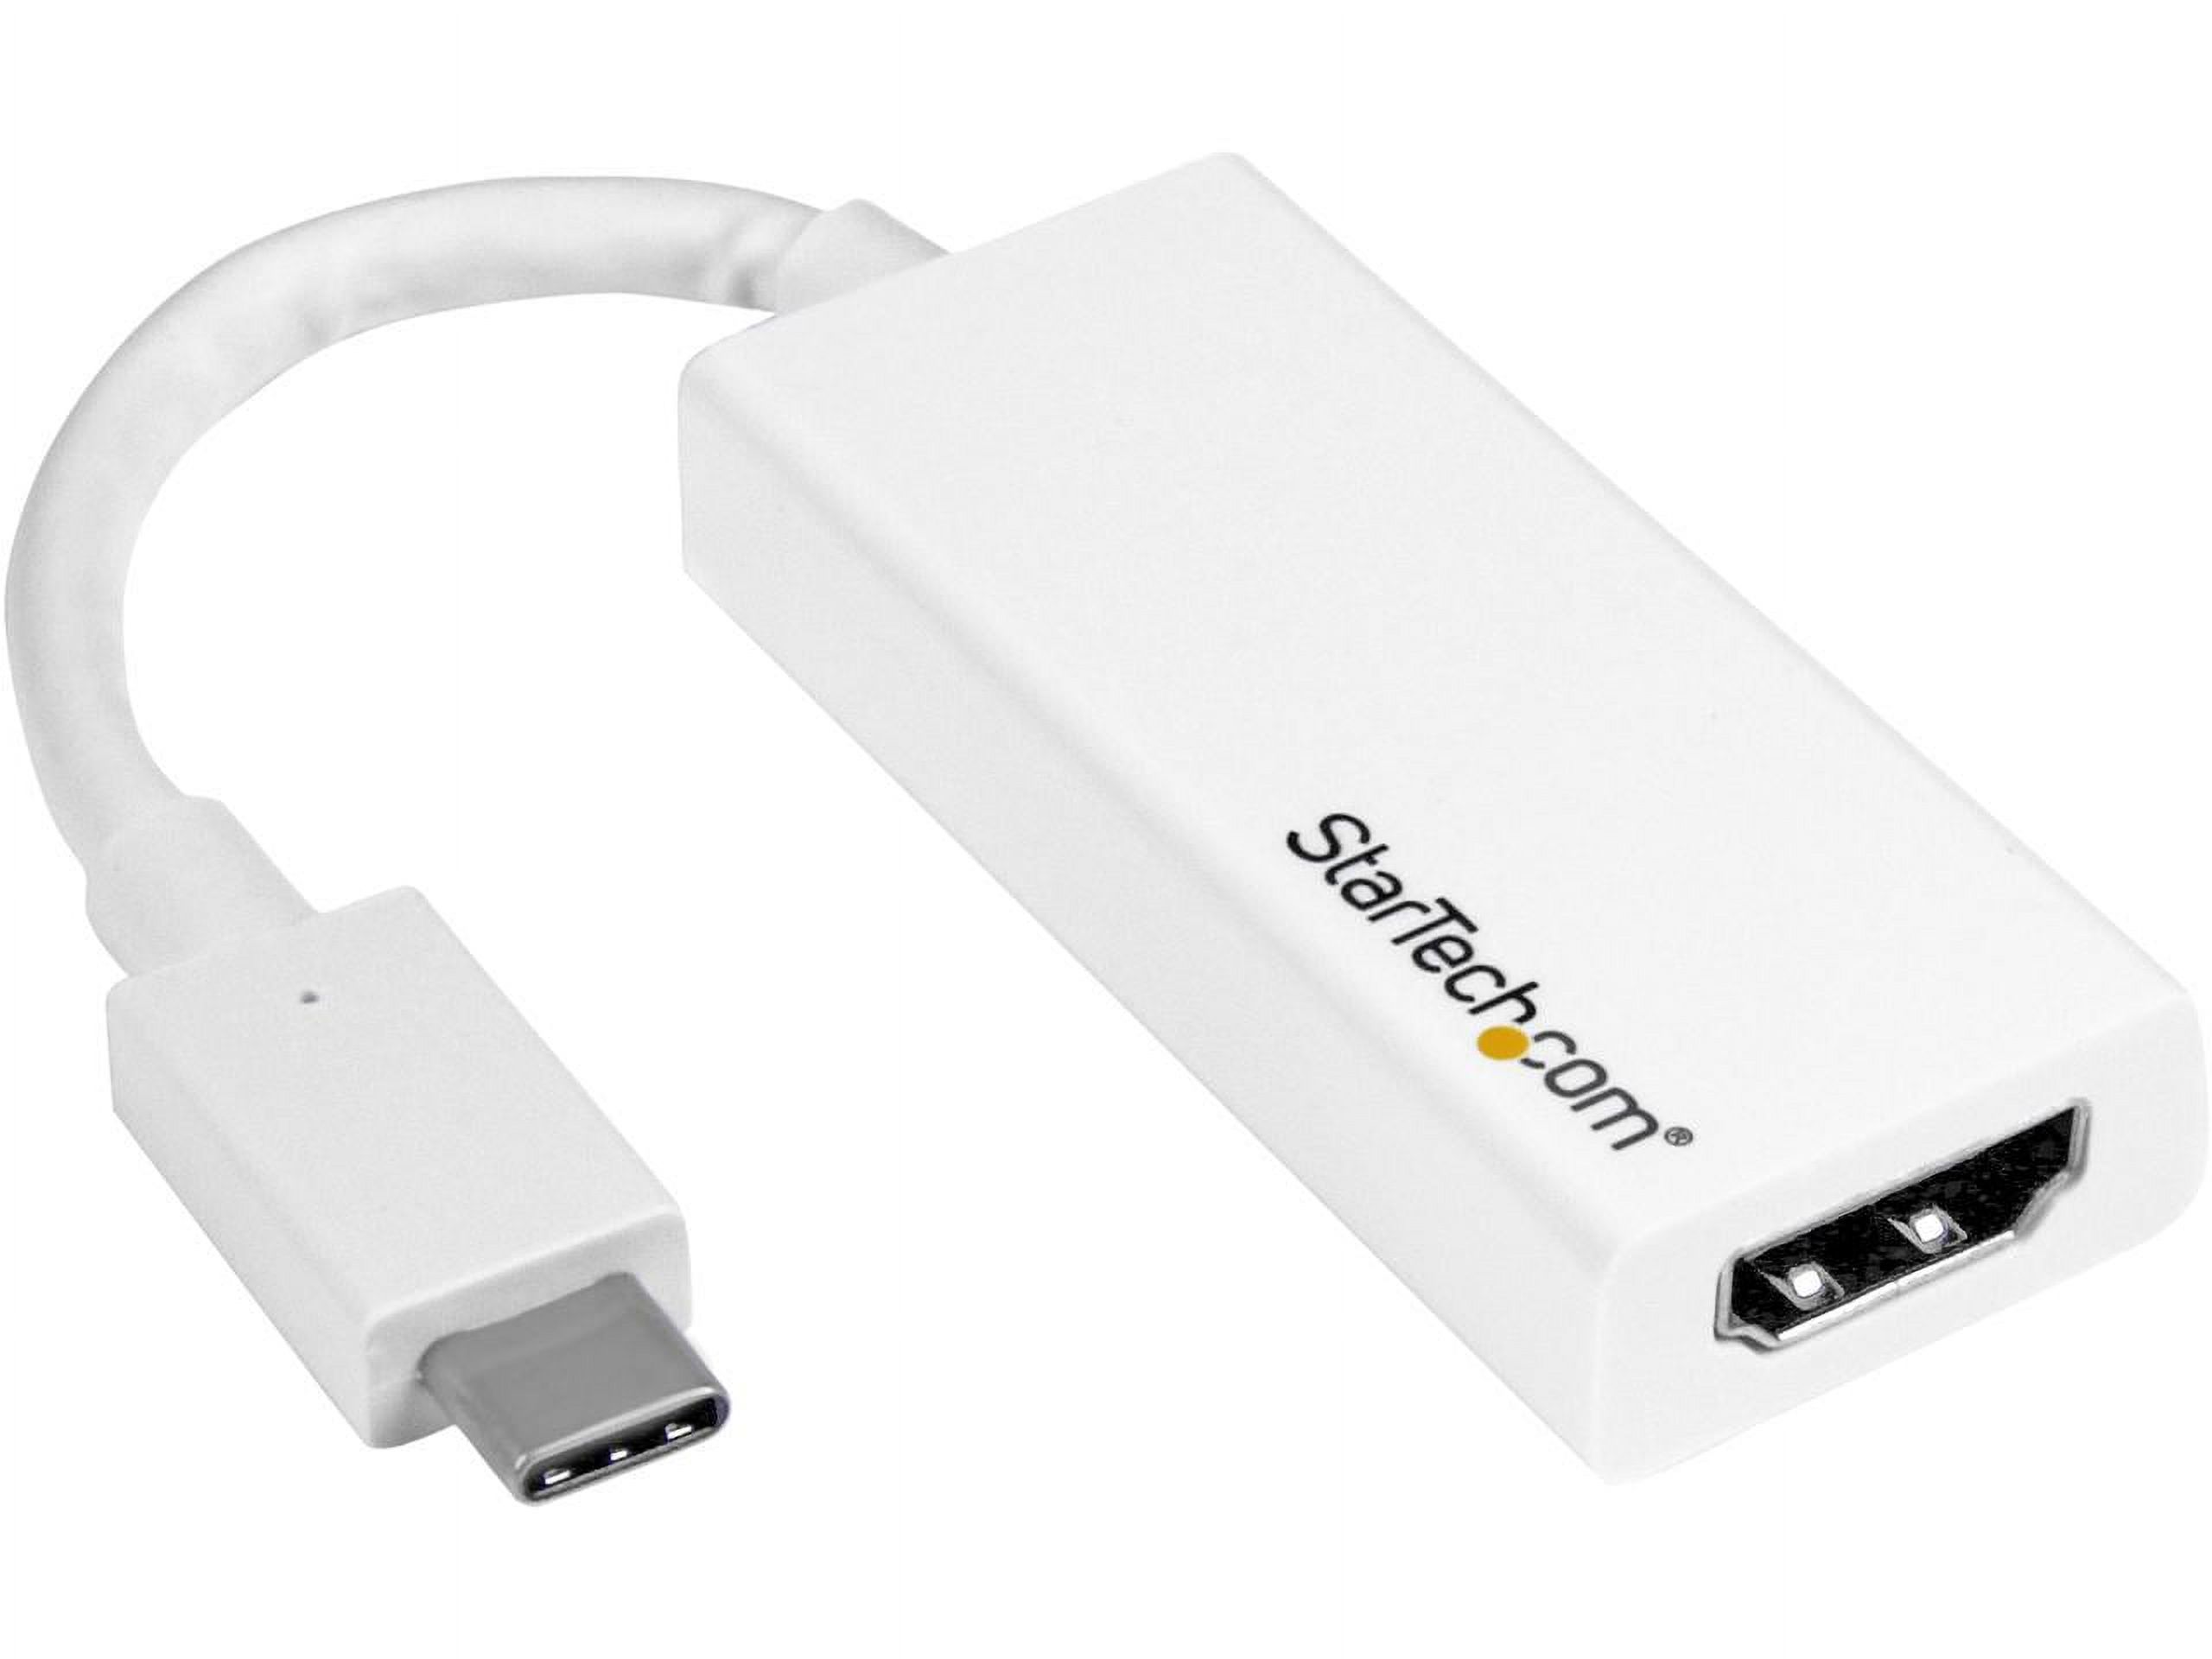 StarTech.com CDP2HDW USB-C to HDMI Adapter - 4K 30Hz - USB 3.1 Type-C to HDMI Adapter - USB C to HDMI Dongle - Monitor Adapter - White (CDP2HDW) - image 1 of 5